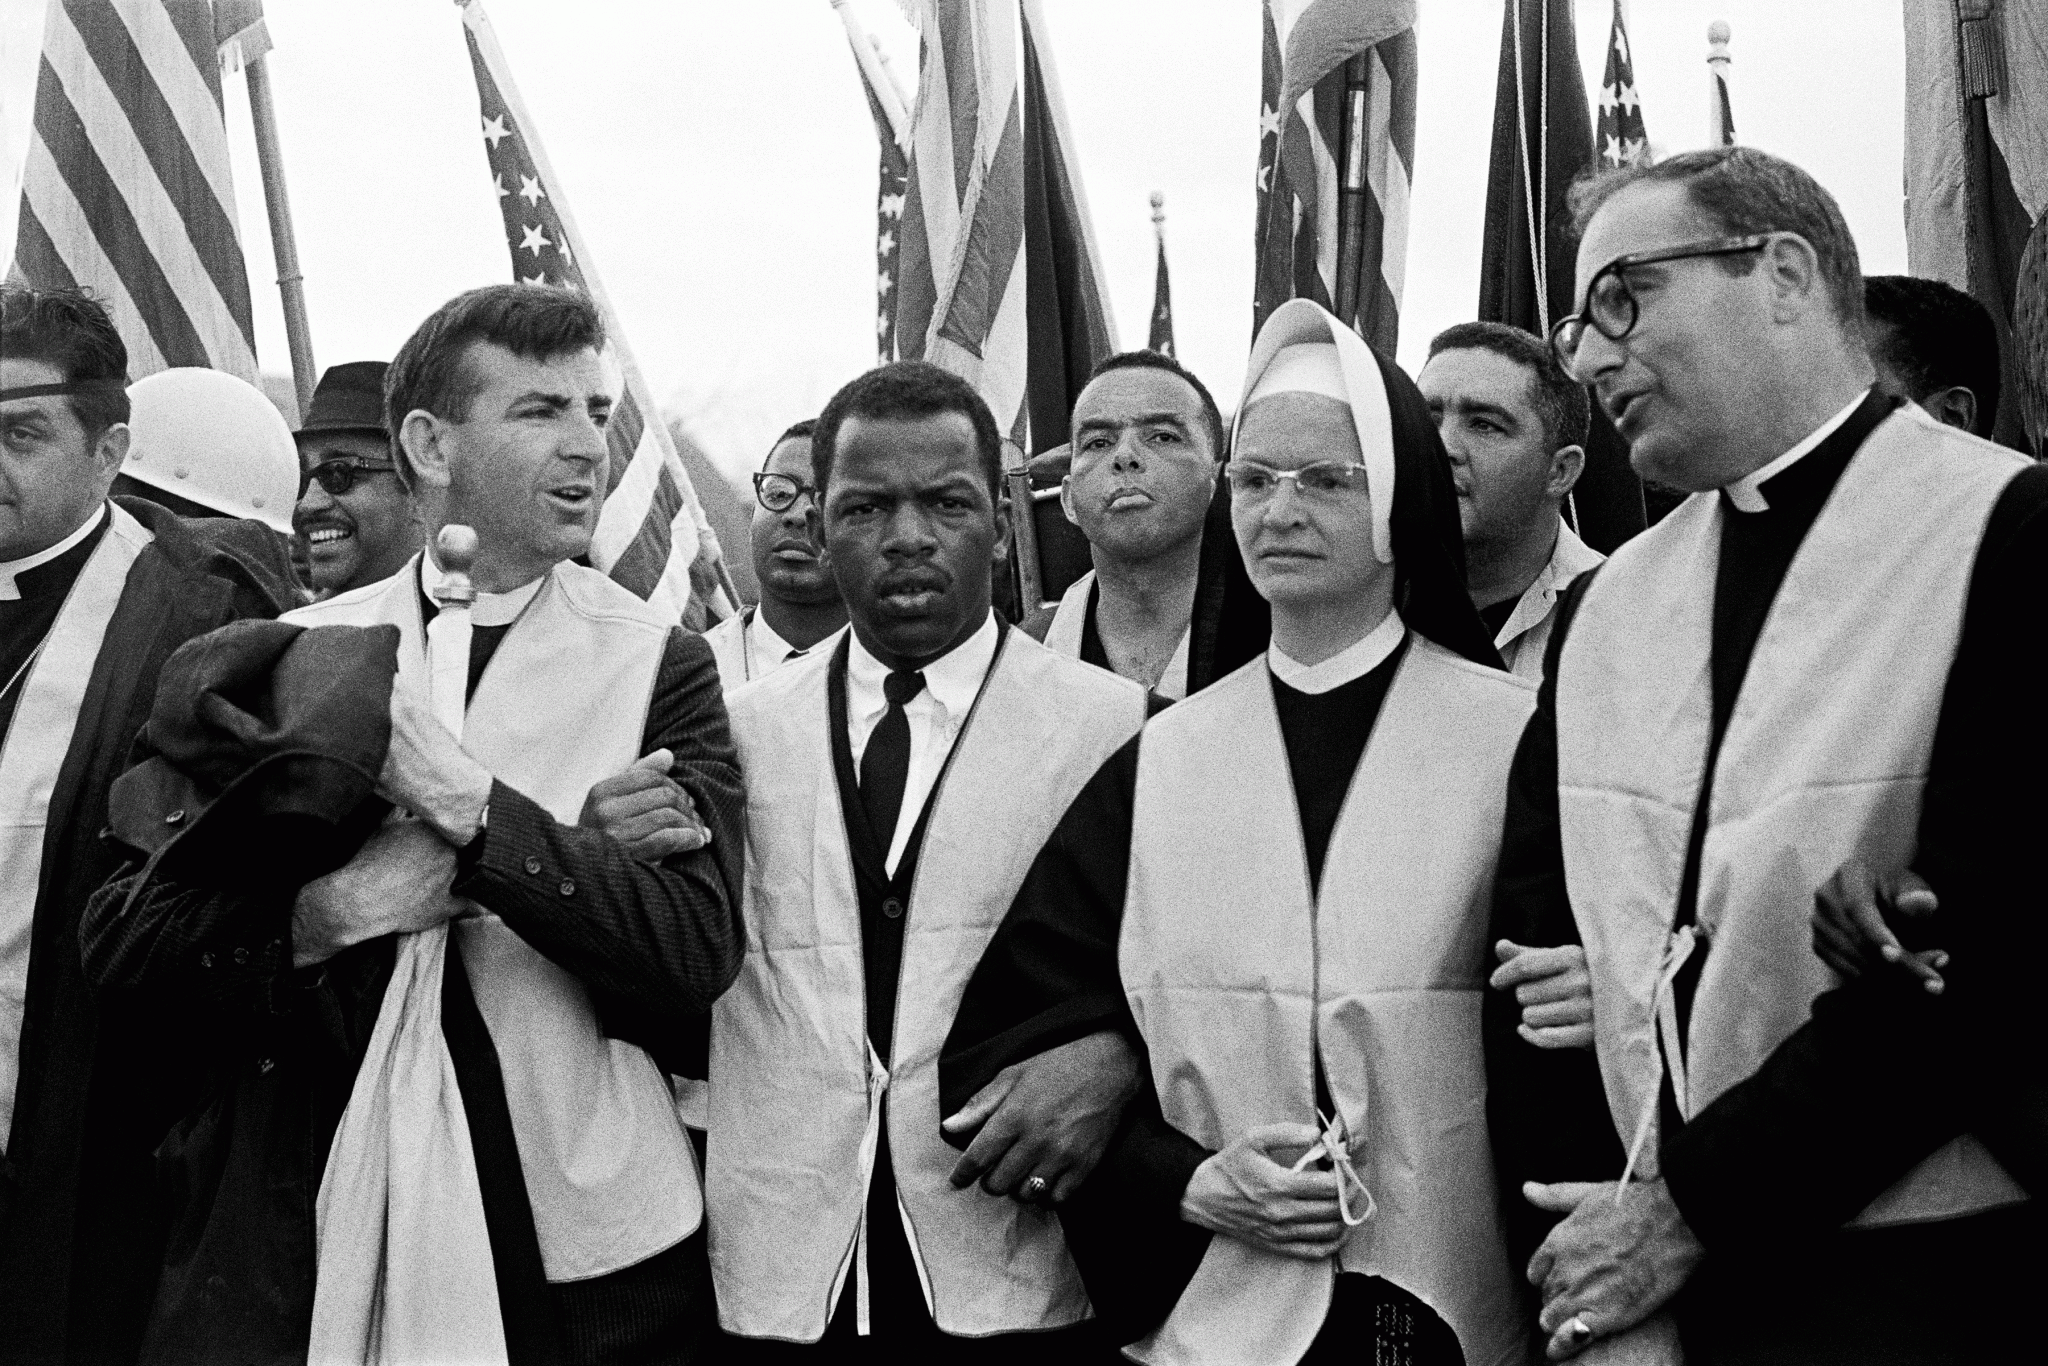 PHOTOS: See Candid Pics from Martin Luther King, Jr.'s 1965 Selma March